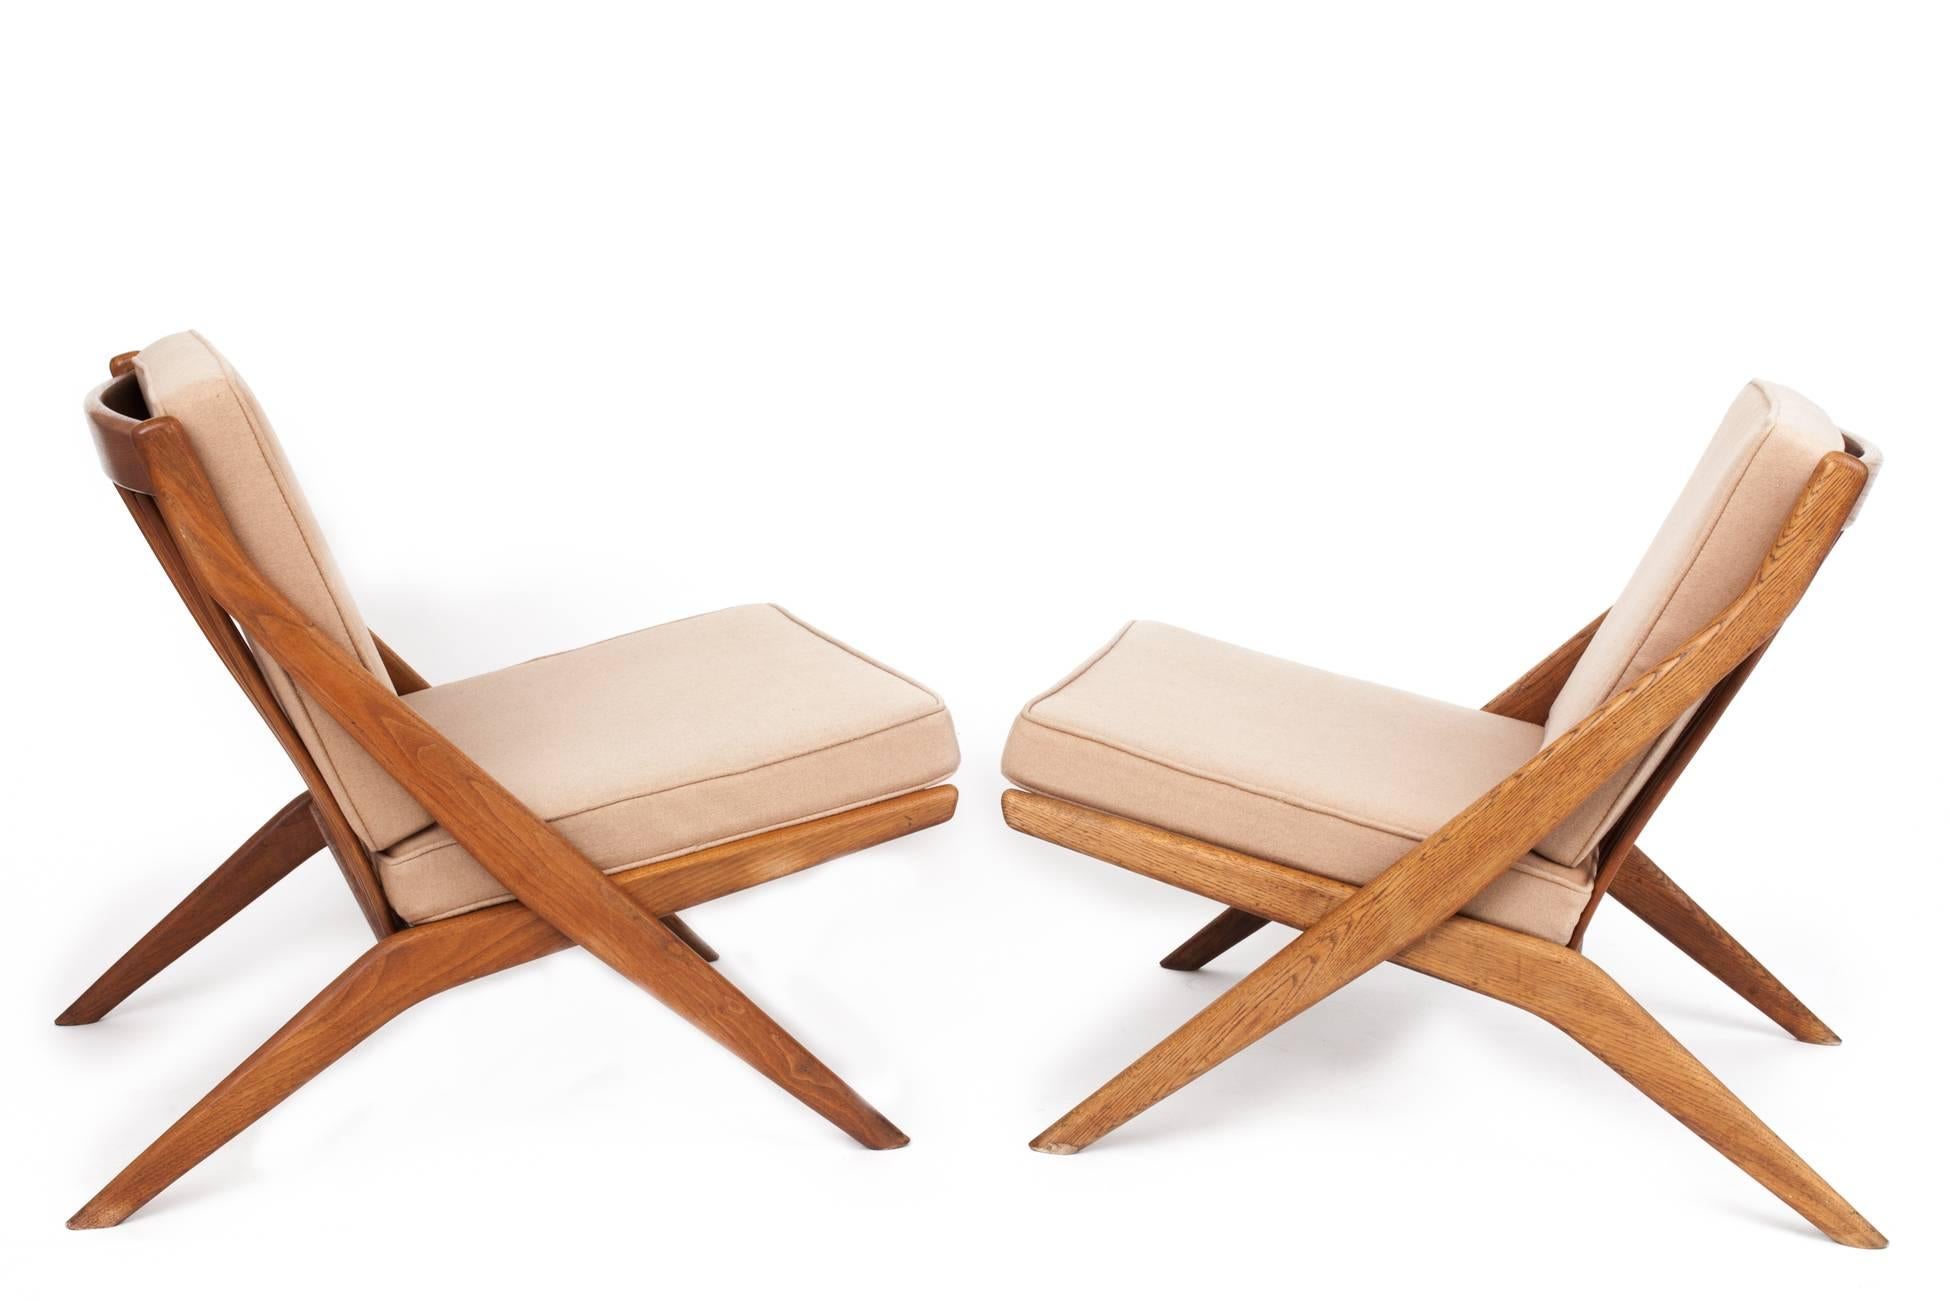 Folke Ohlsson (1919–2003)

Streamlined pair of recliner scissor side chairs by Swedish-American designer Folke Ohlsson for Dux, featuring a graceful slatted back and tapering X-shaped legs, in walnut with tan cashmere cushions.

Manufacturer’s